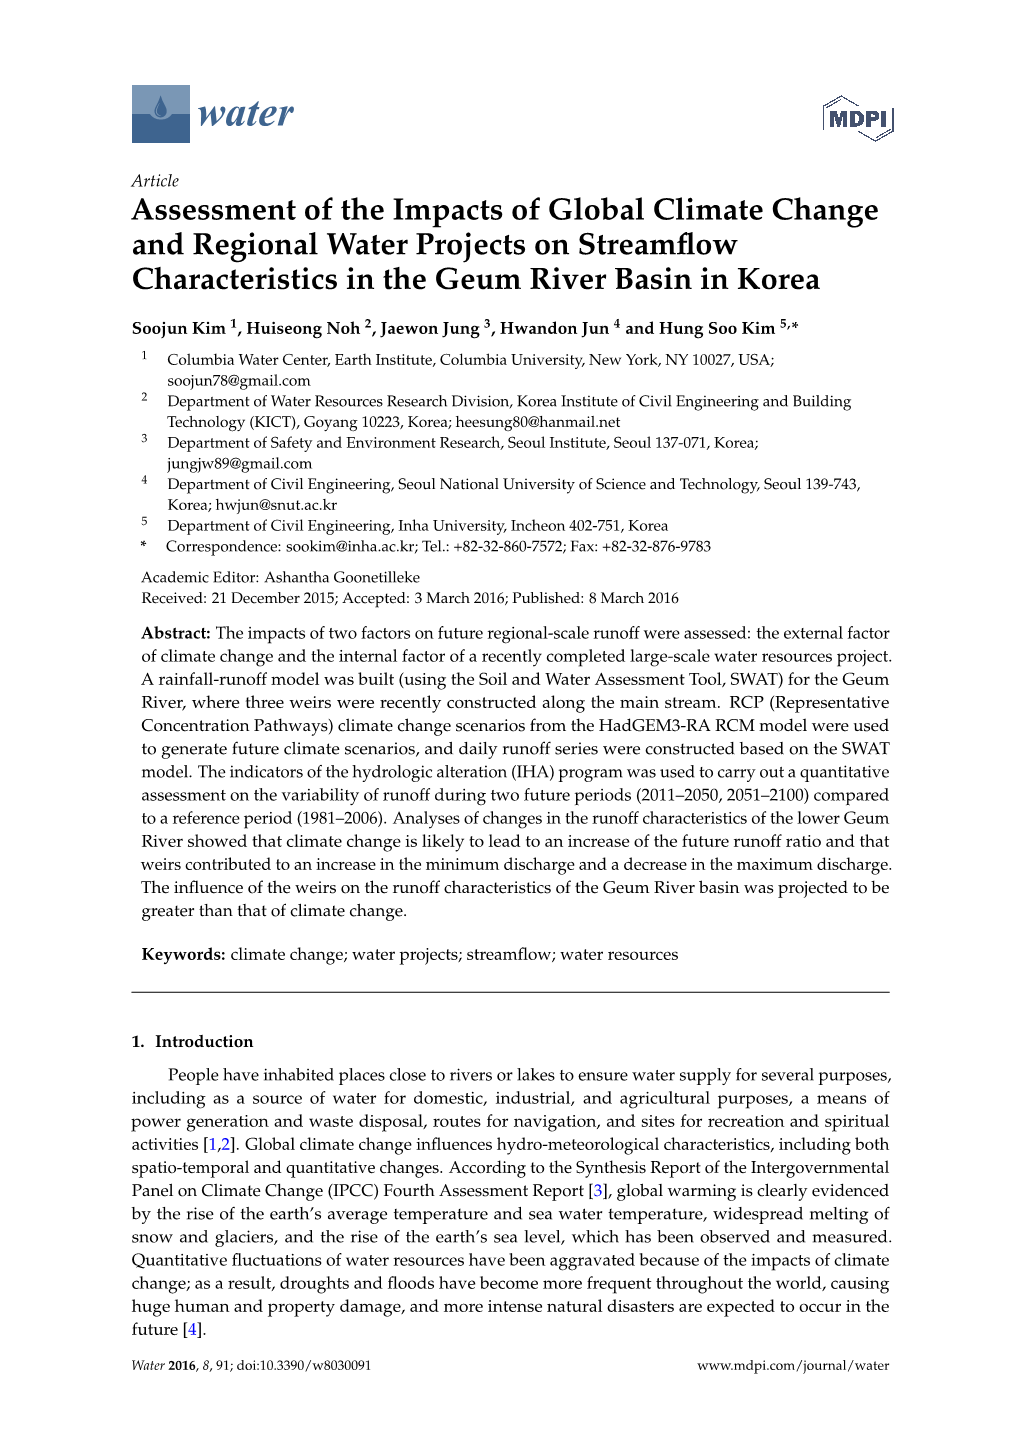 Assessment of the Impacts of Global Climate Change and Regional Water Projects on Streamﬂow Characteristics in the Geum River Basin in Korea